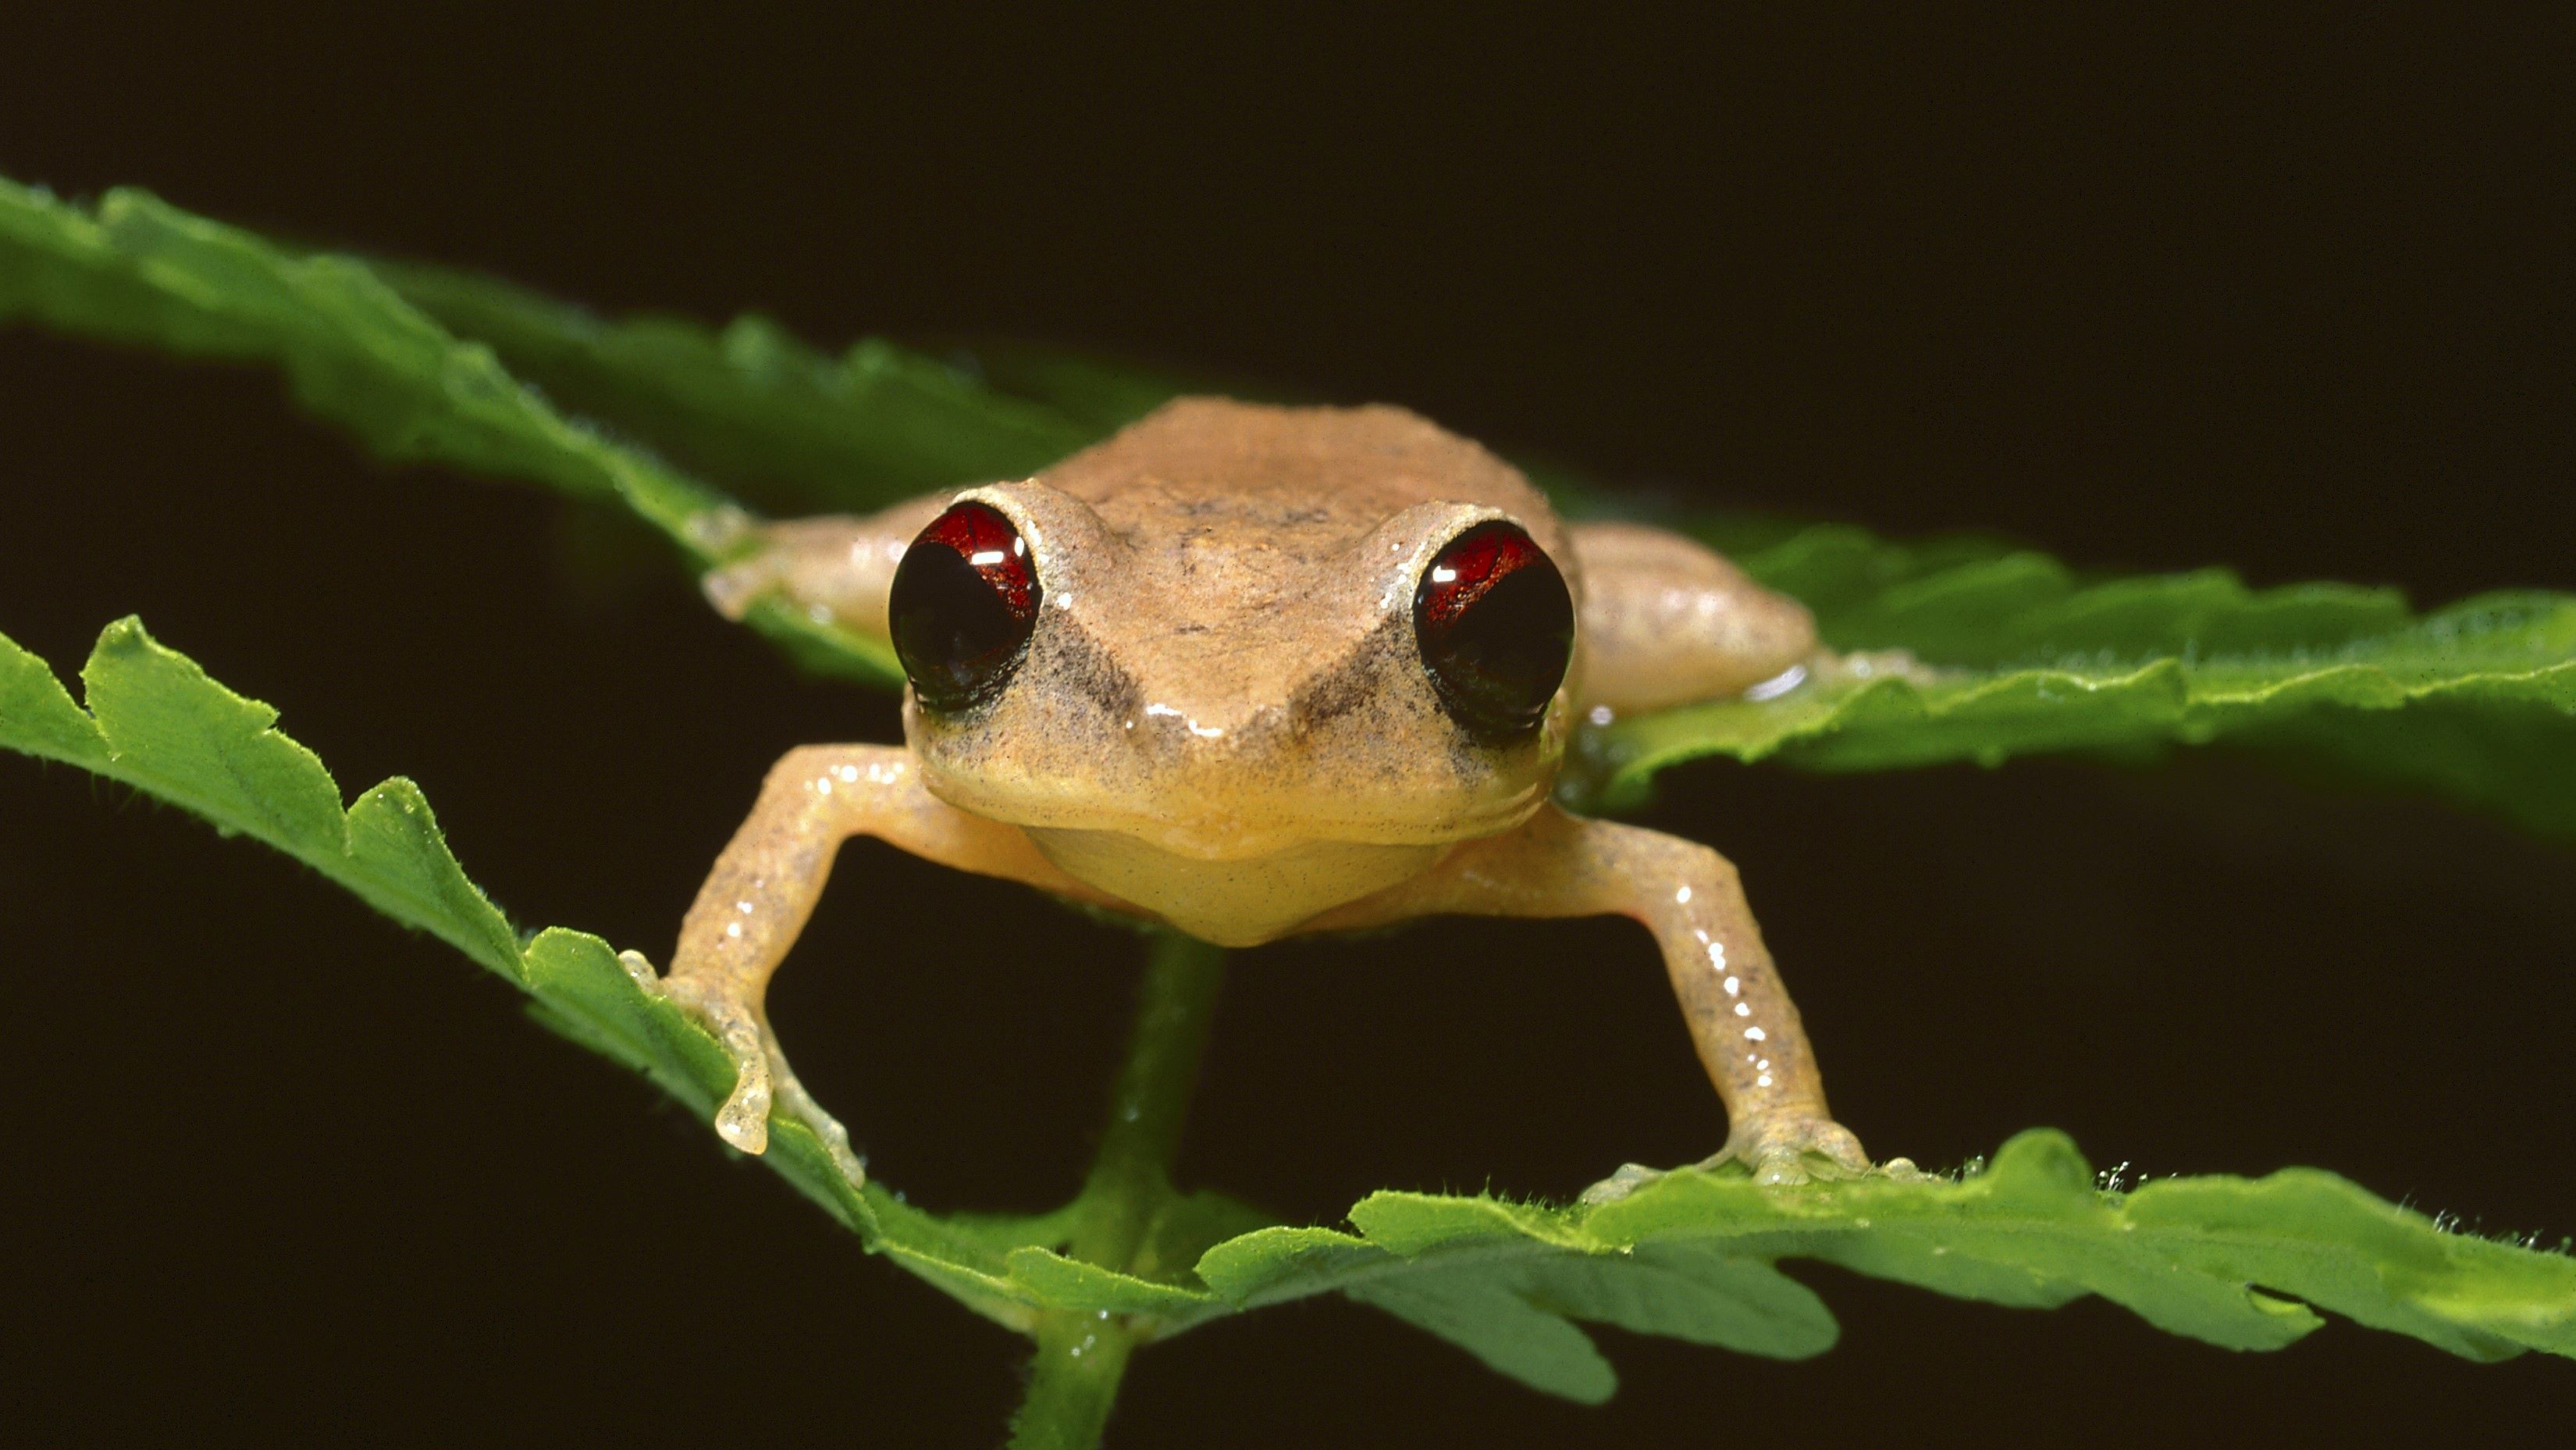 a tiny frog with massive eyes and brown body sitting on a leaf on a black background